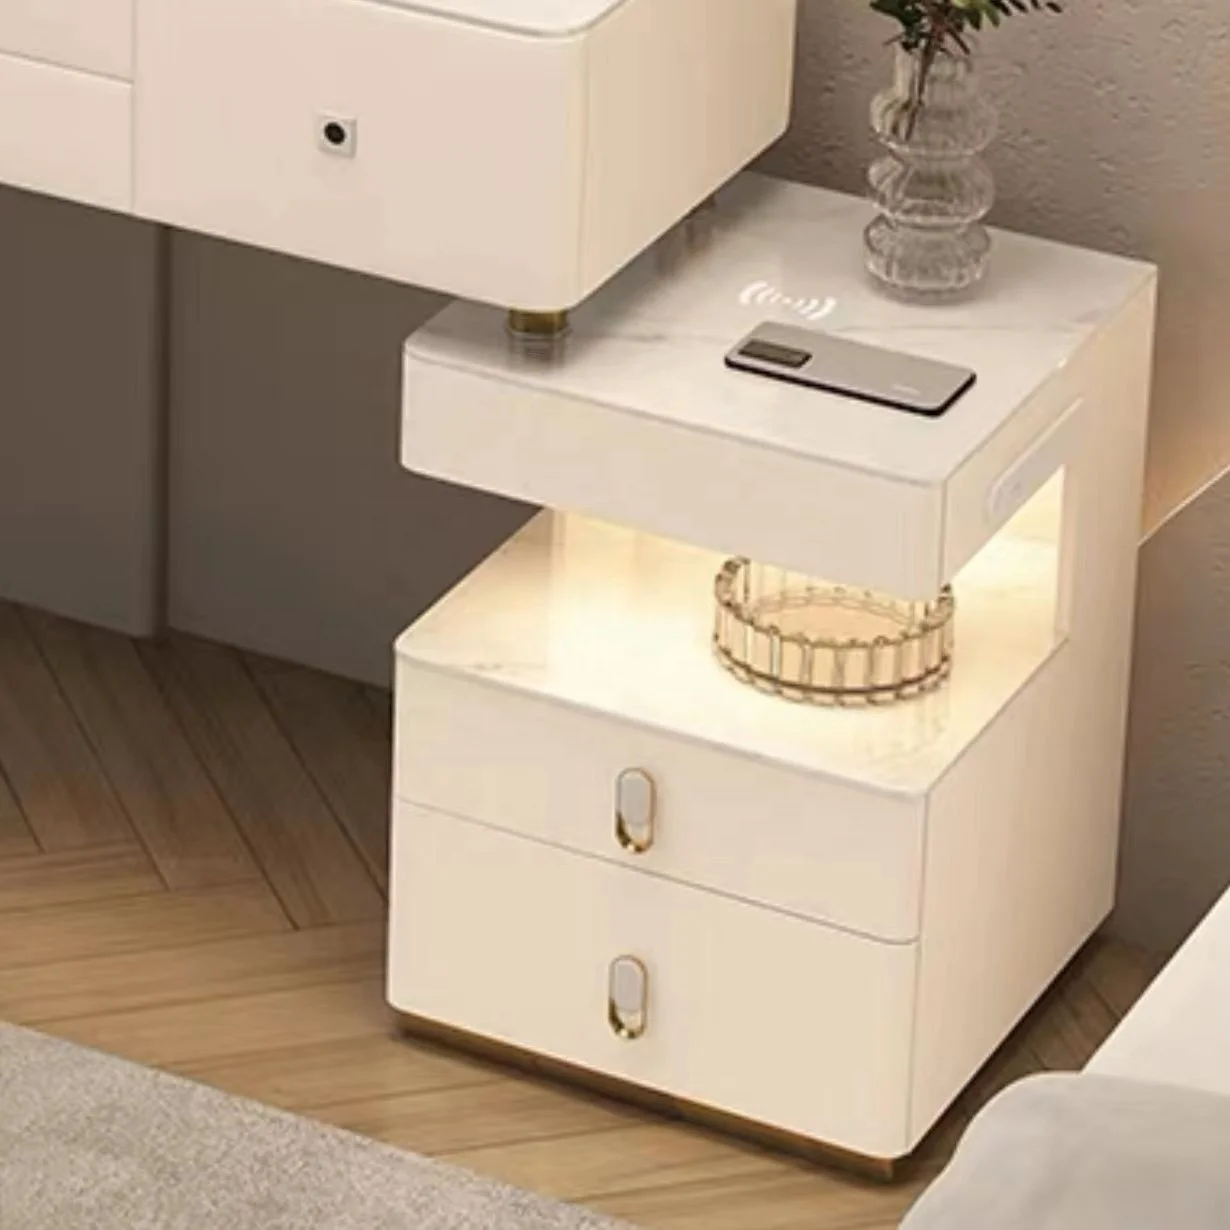 NOVA Multi-functional Wireless Charging And Storage Cabinet Integrated Marble Top Makeup Table With Smart Fingerprint Sideboard